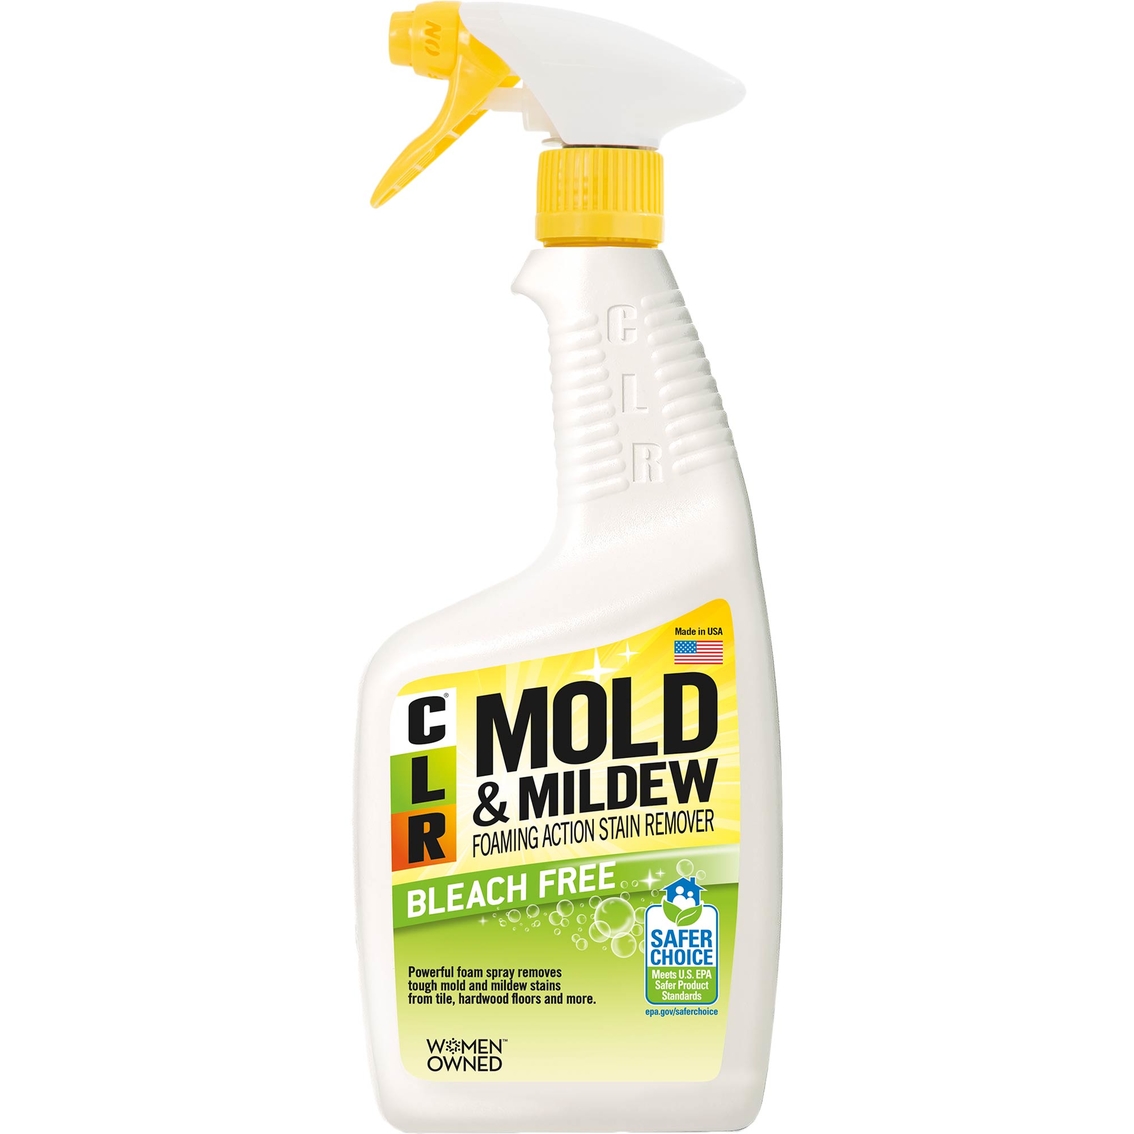 CLR Mold & Mildew Foaming Stain Remover Spray, Bleach-Free Cleaner